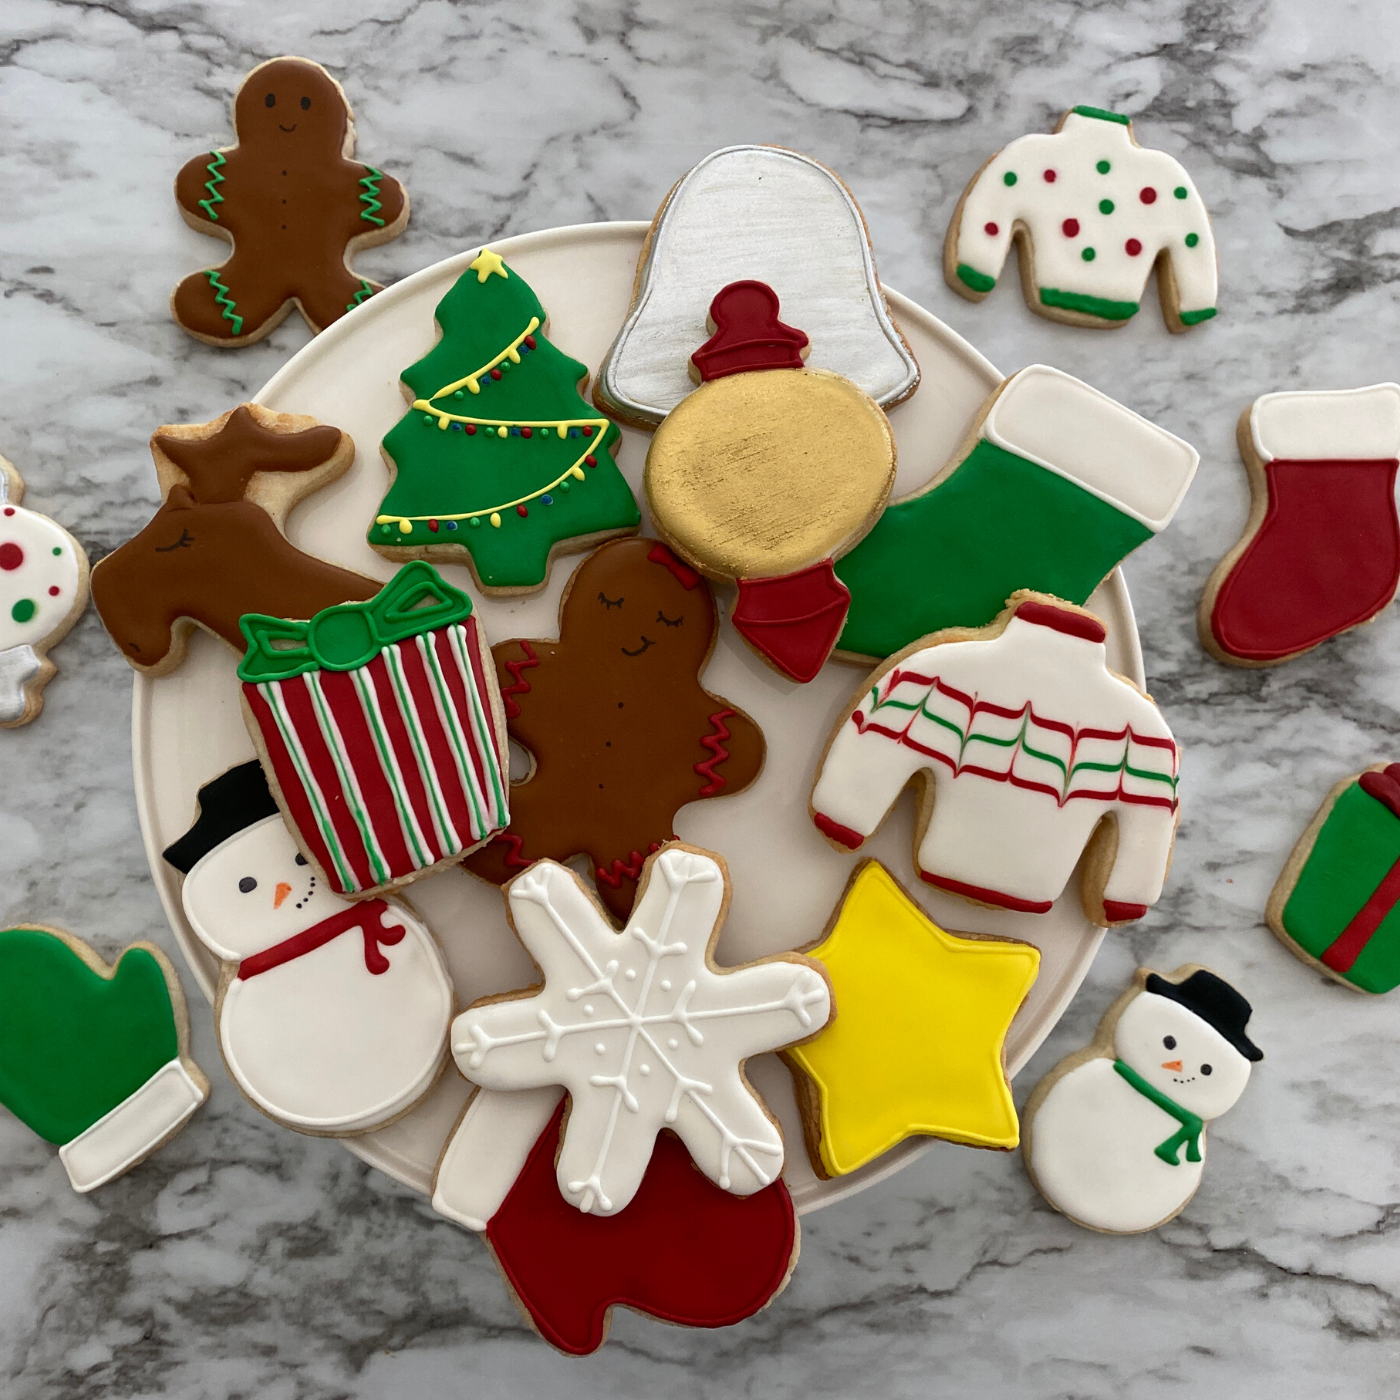 Lifestyle image of completed winter wonderland cookies including a snowman, Christmas tree, snowflake, and more.